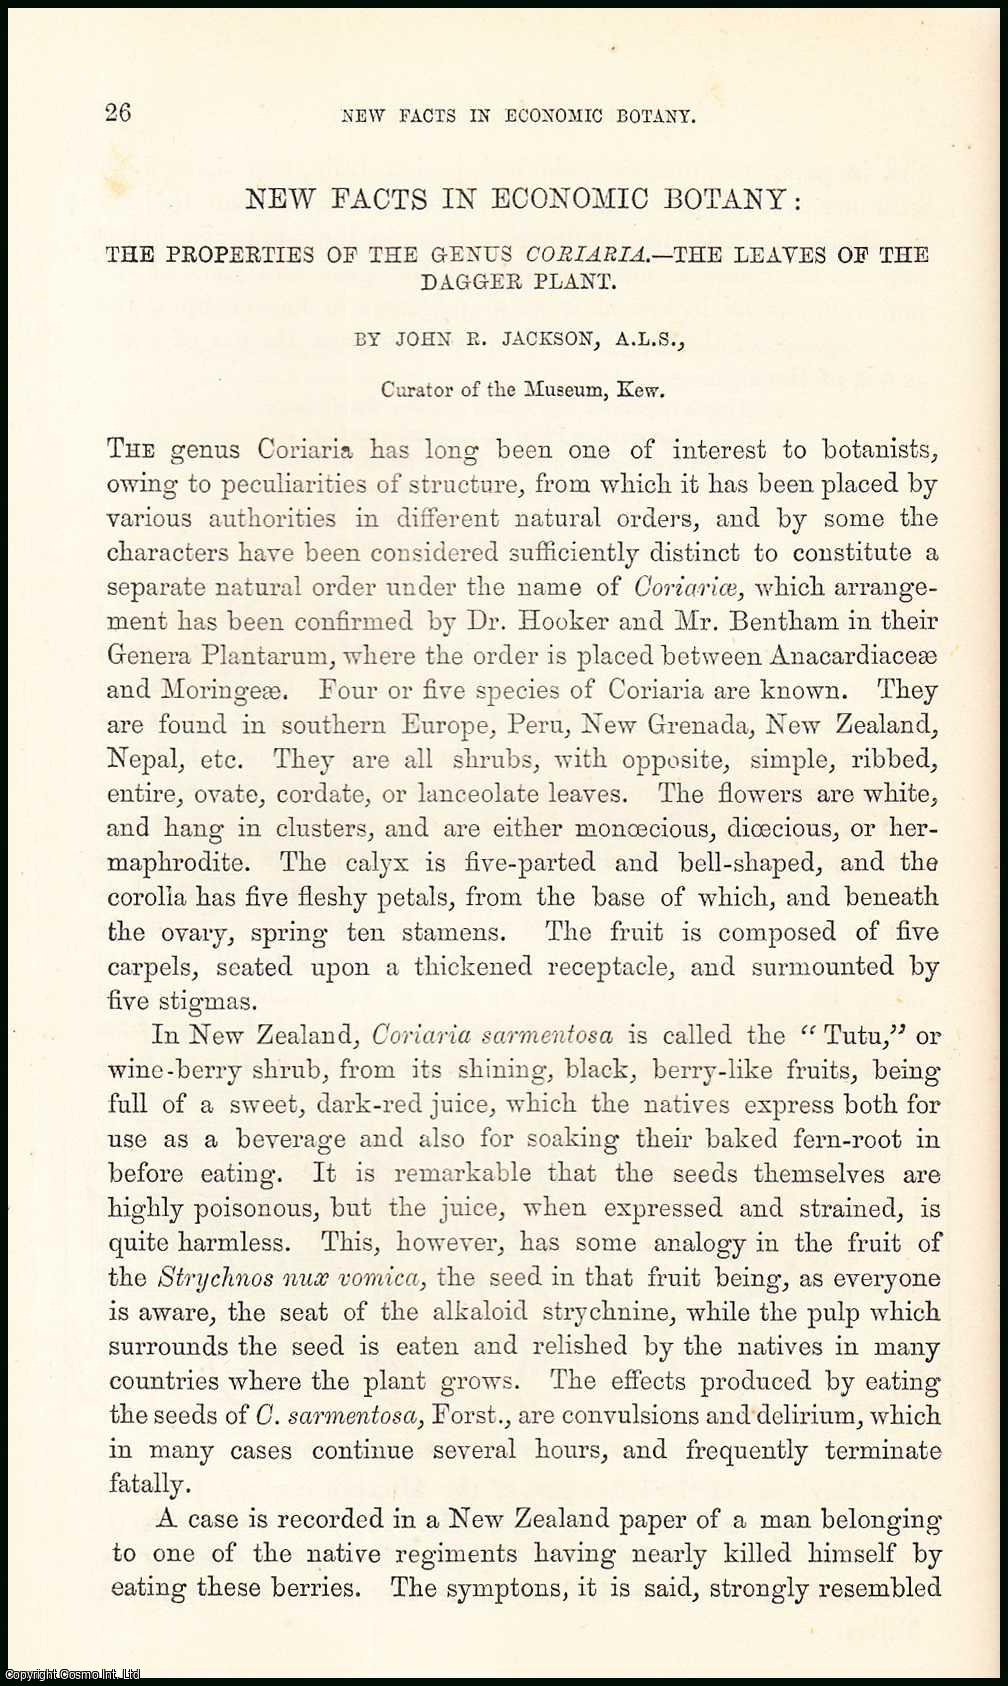 John R. Jackson, Curator, Museum, Royal Gardens, Kew. - The Properties of the Genus Coriaria - The Leaves of the Dagger Plant : New Facts in Economic Botany. An uncommon original article from the Student and Intellectual Observer of Science Literature & Art, 1869.